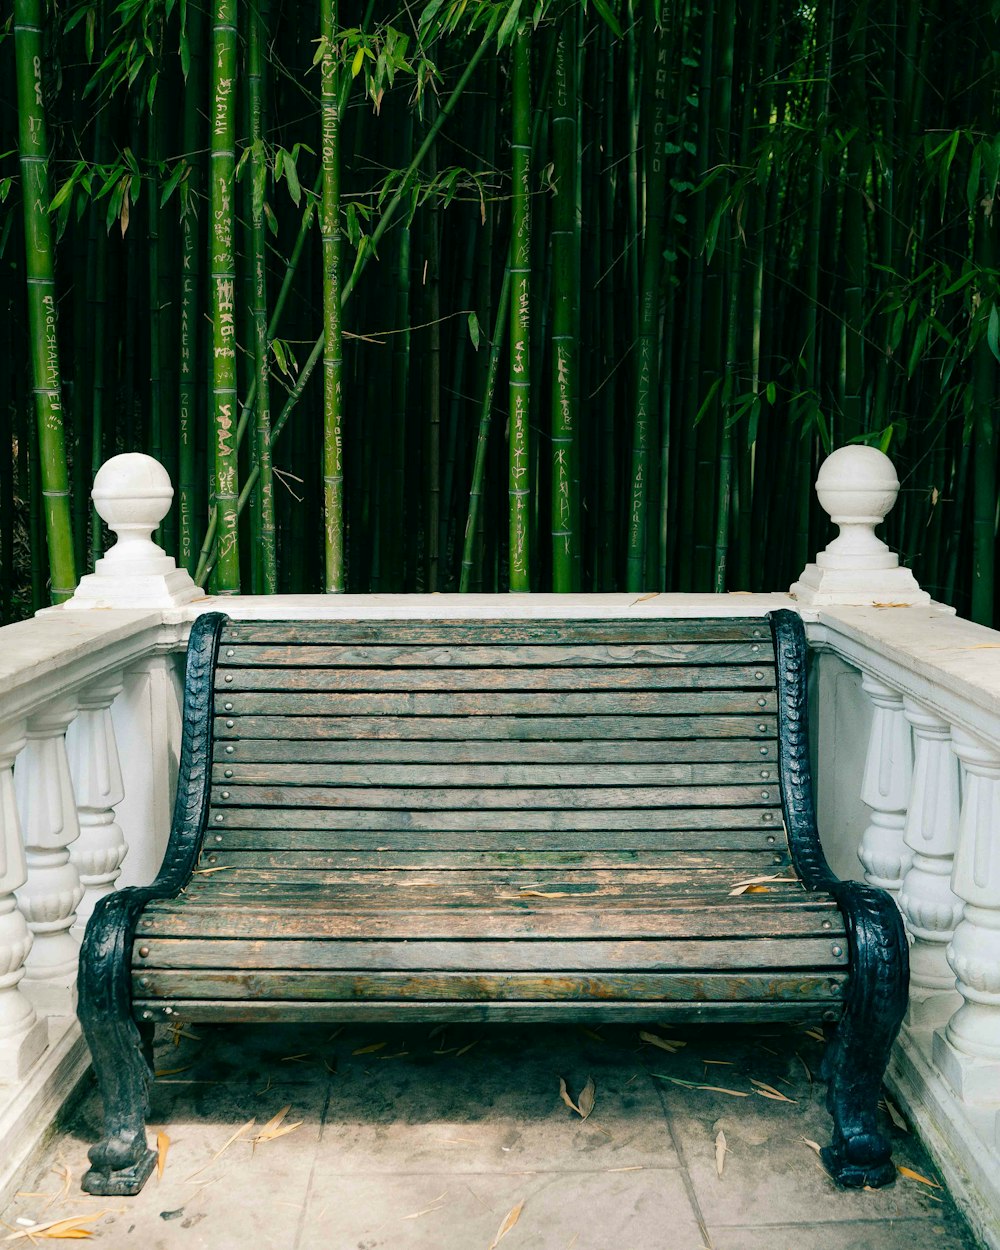 a wooden bench sitting in front of a bamboo forest